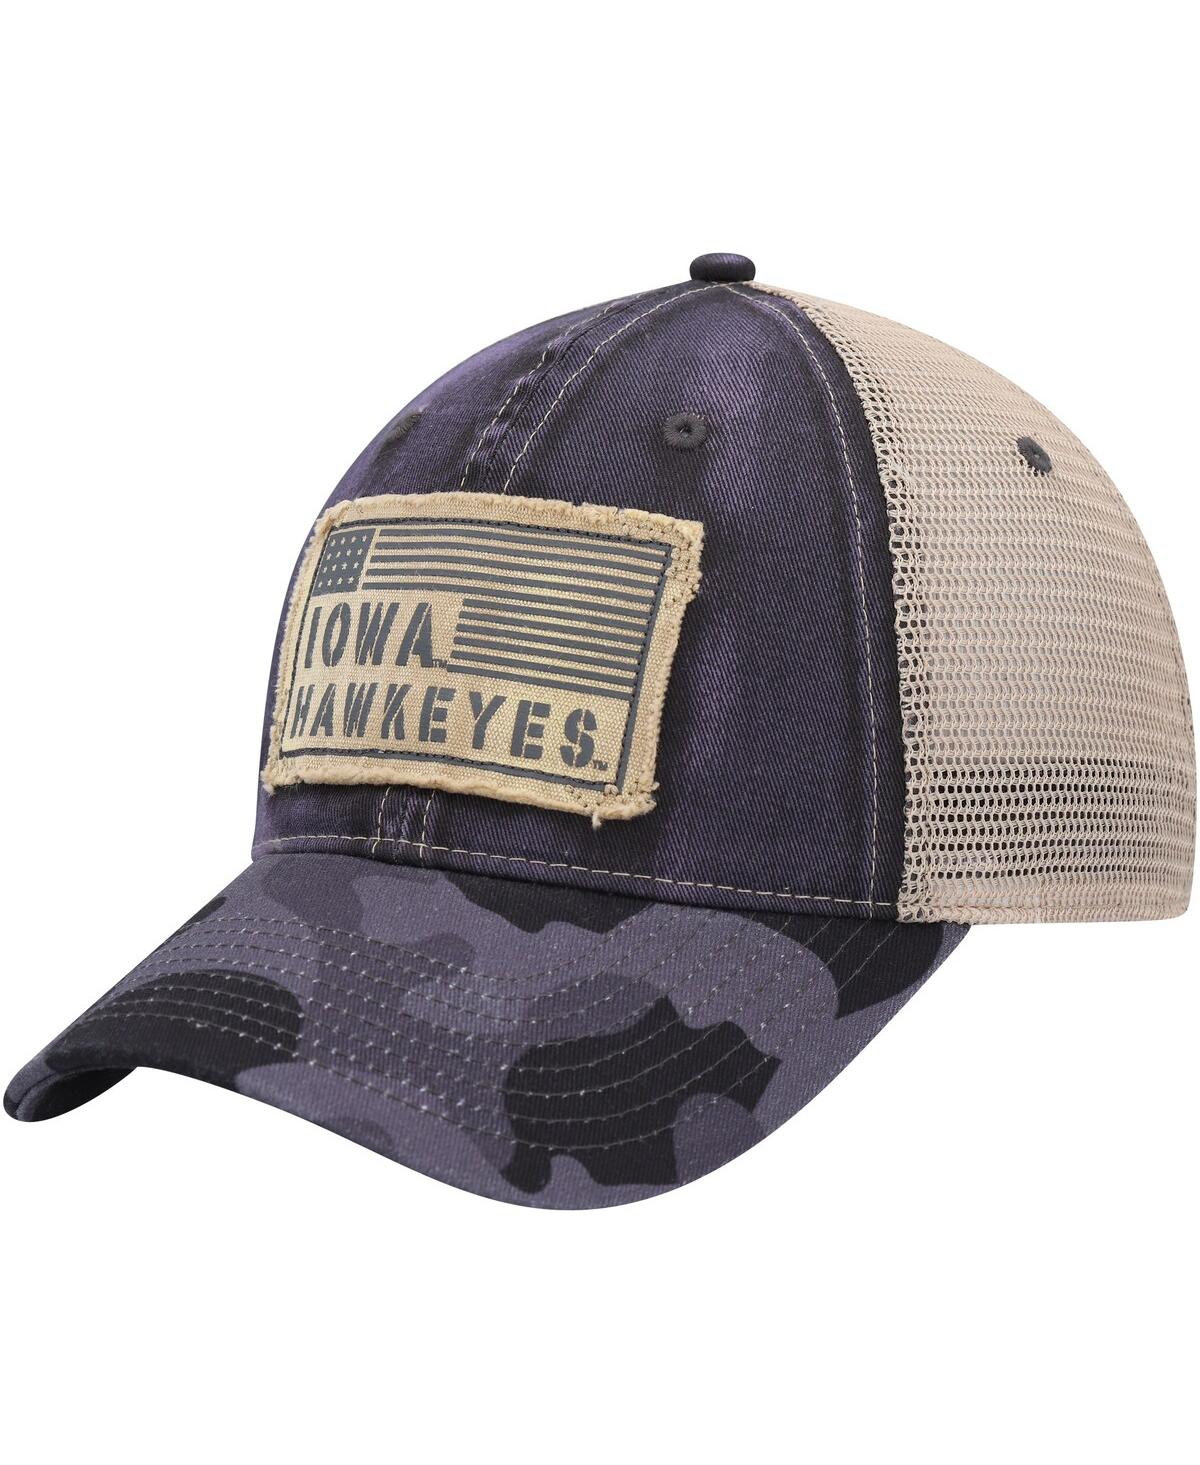 Men's Colosseum Charcoal Iowa Hawkeyes Oht Military-Inspired Appreciation United Trucker Snapback Hat - Charcoal